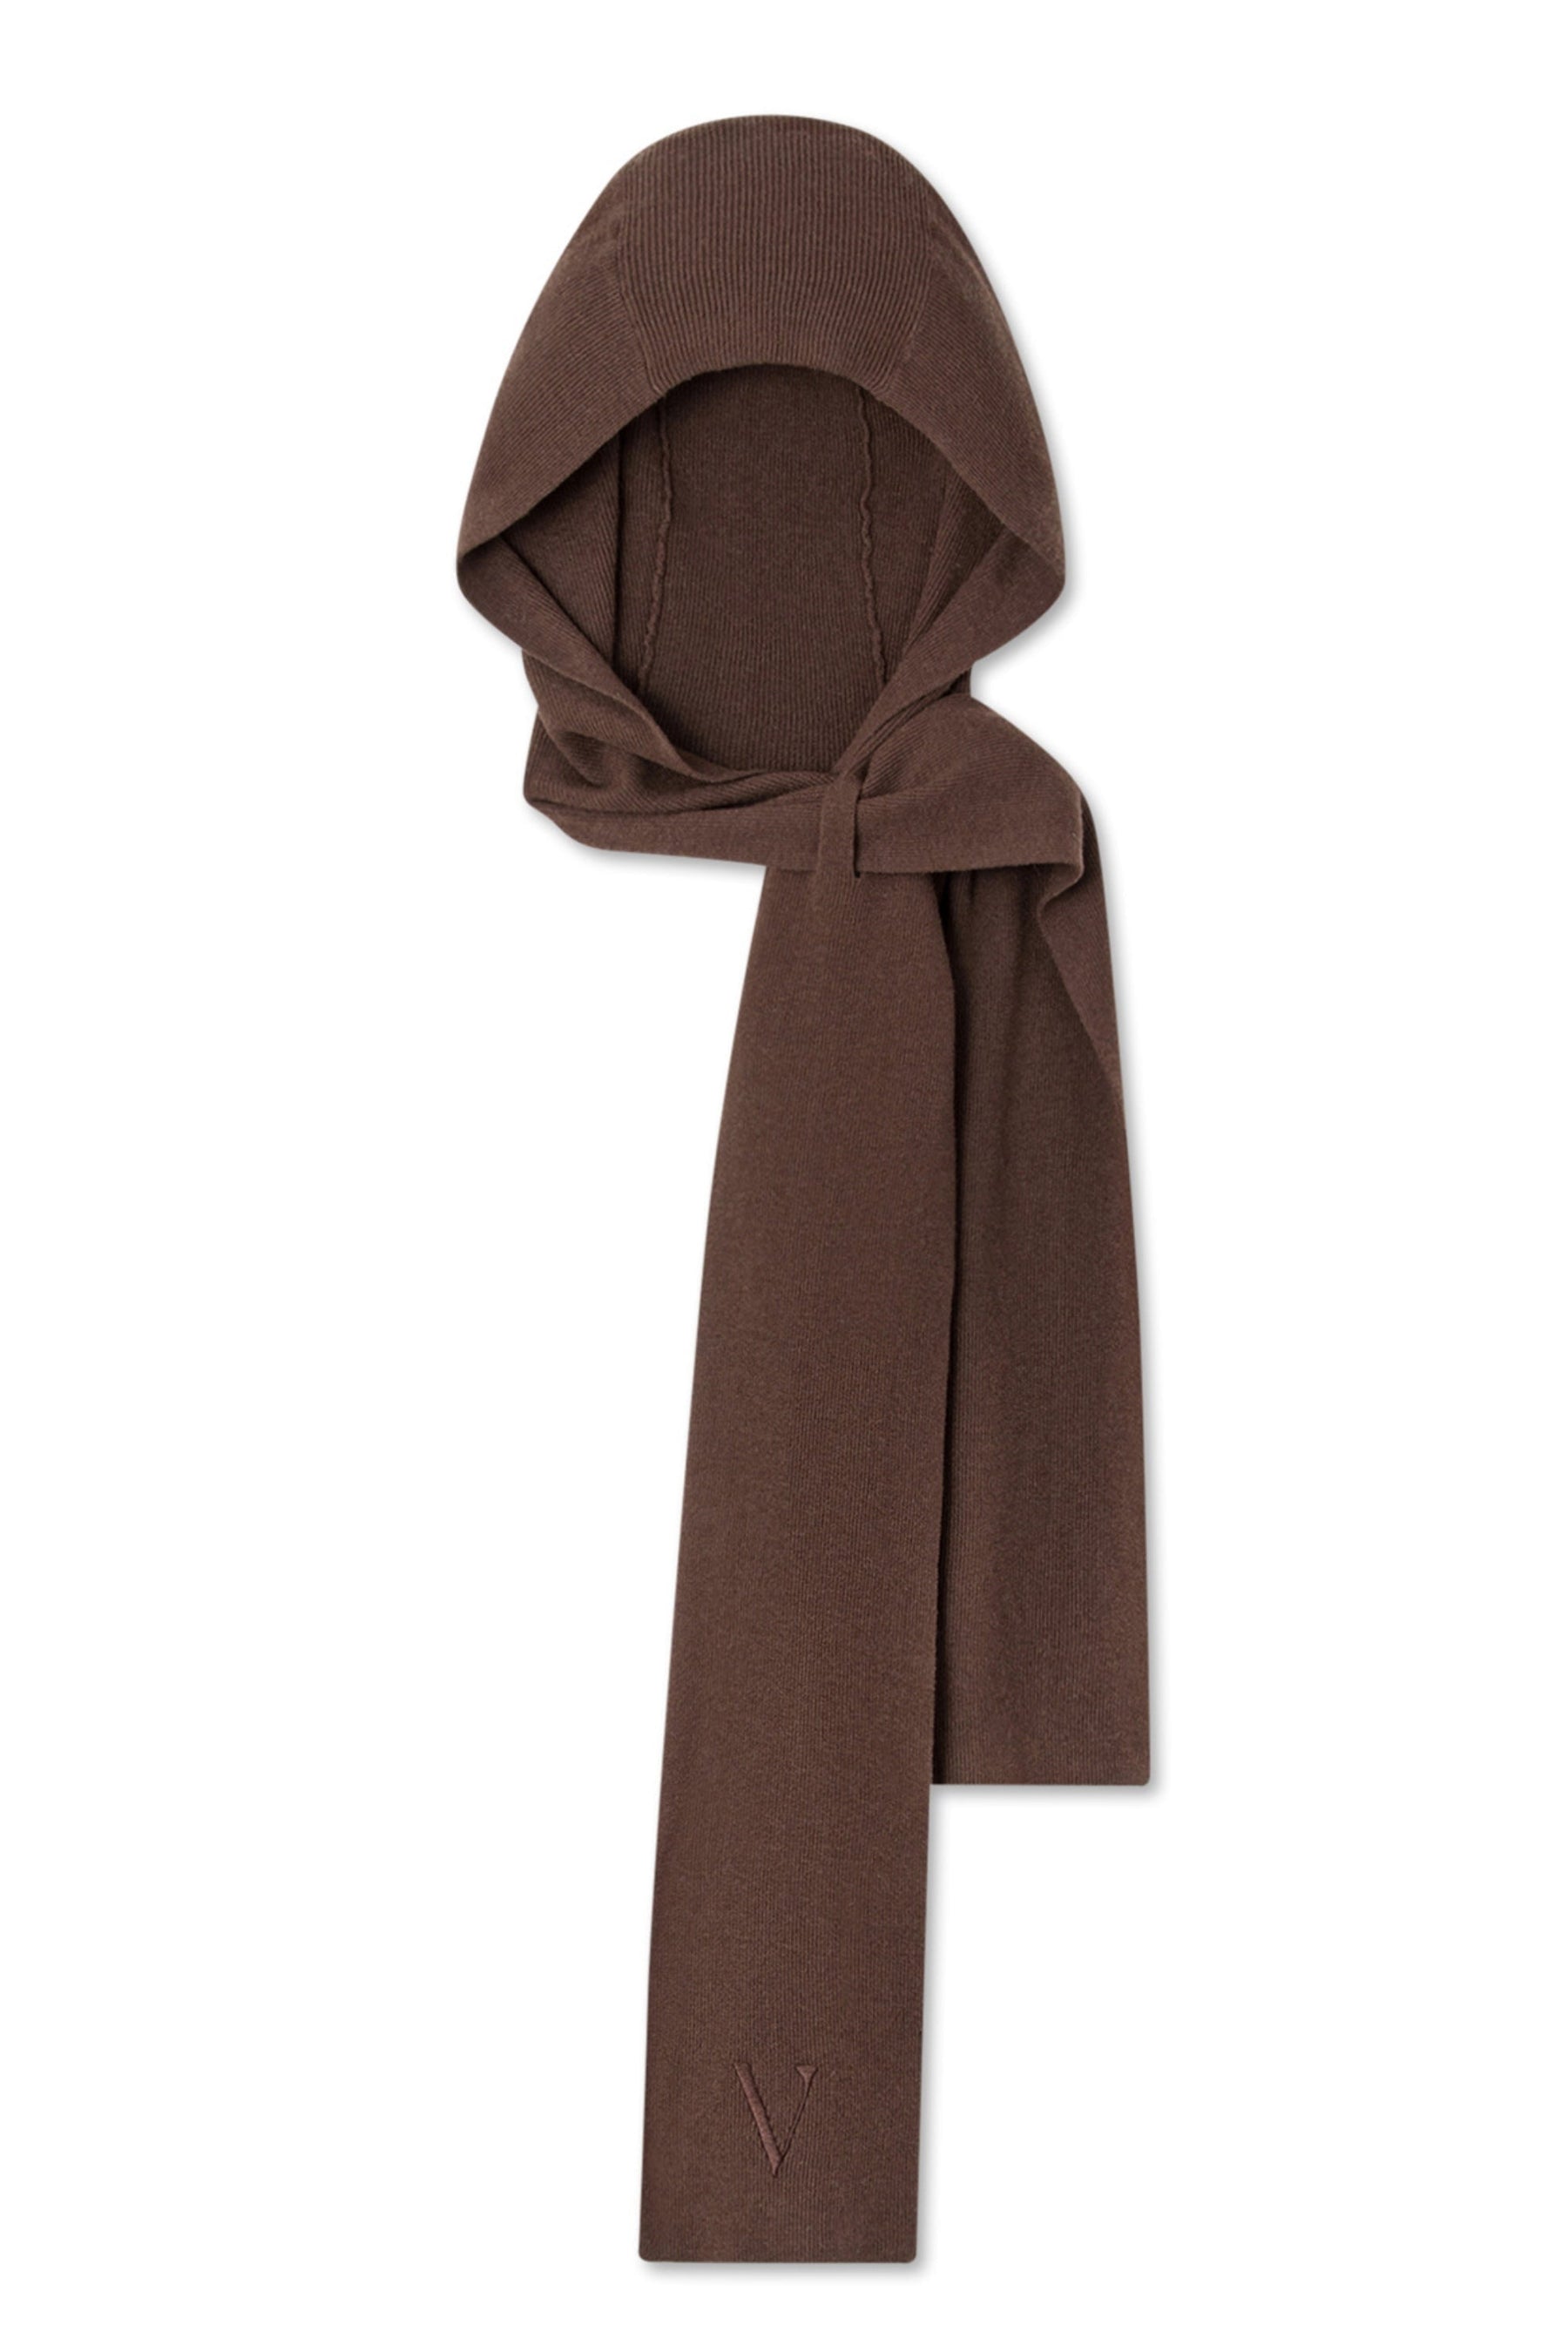 Men's WINTER 100% CASHMERE SCARF SOLID Dark Brown Made in England Soft  Wool Wrap